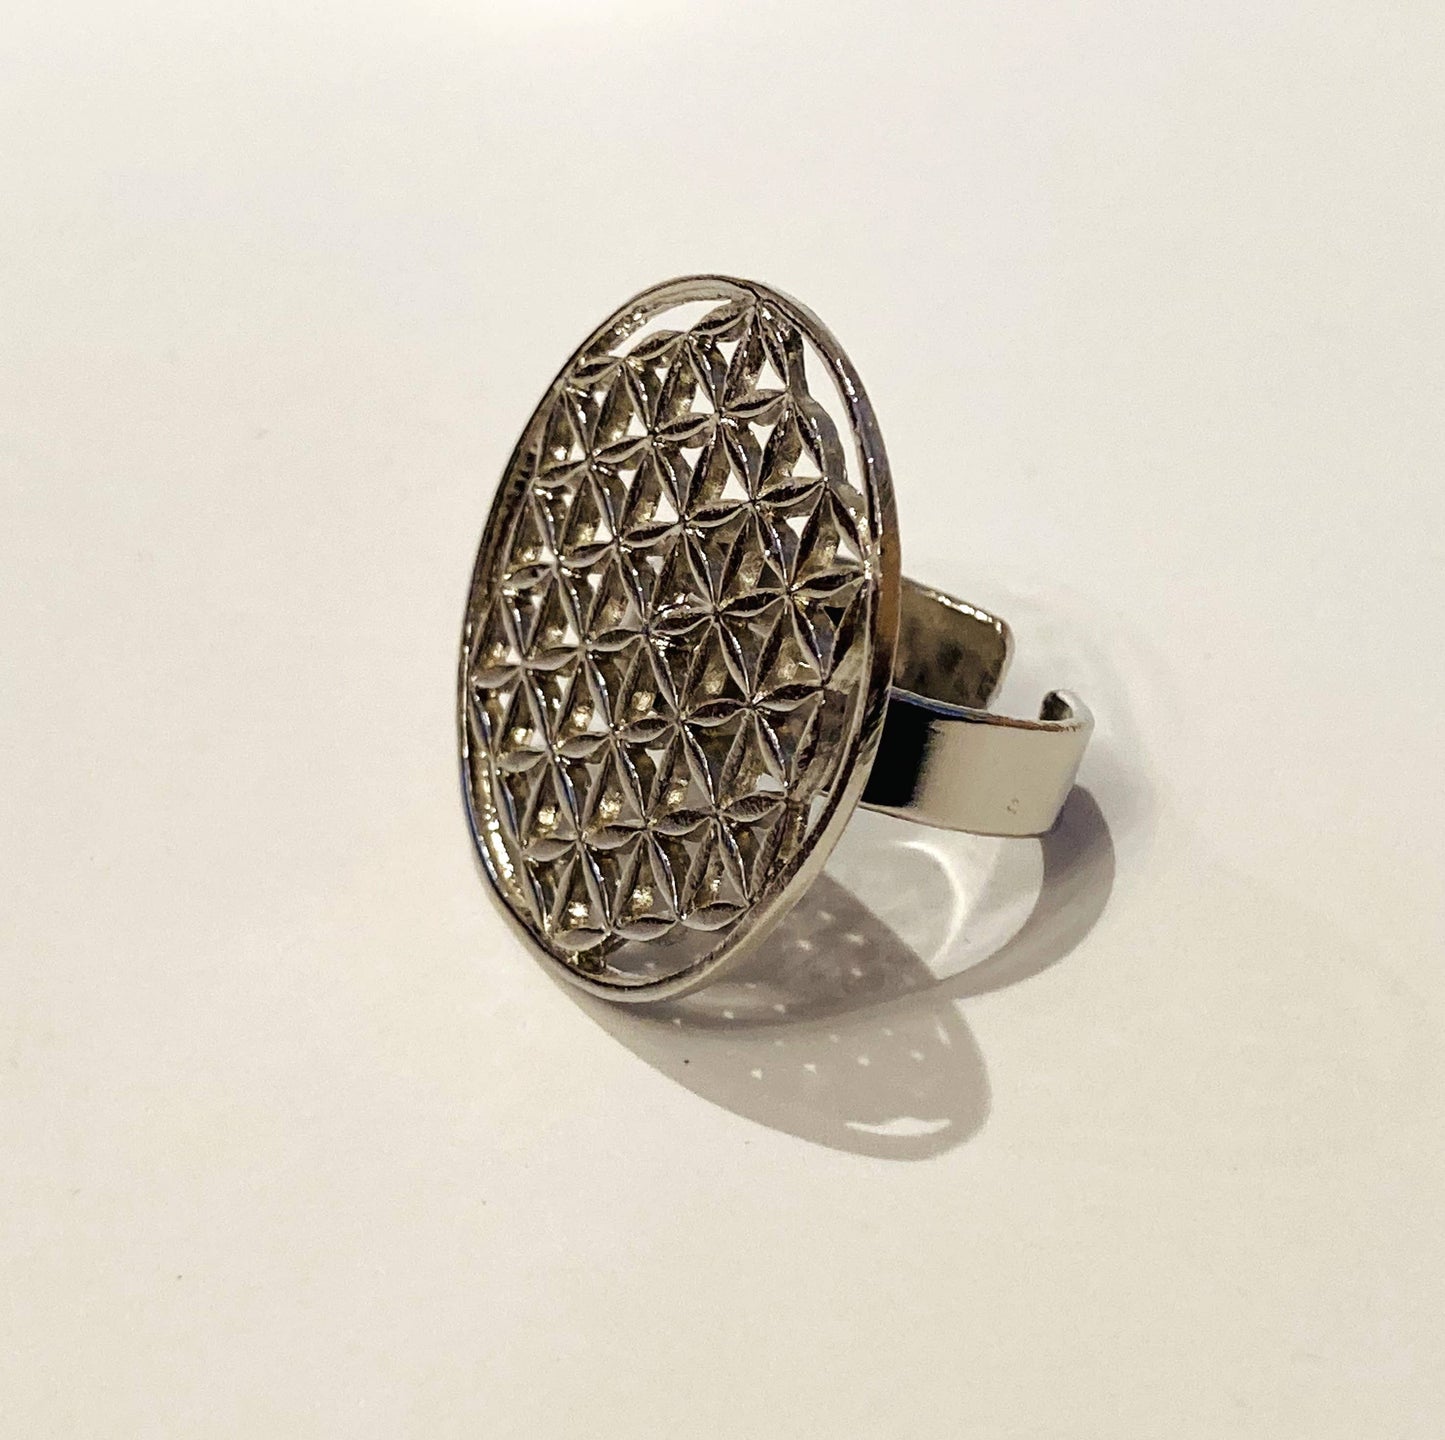 Handmade Brass Ring Plated with Nickel - Triangles Grid